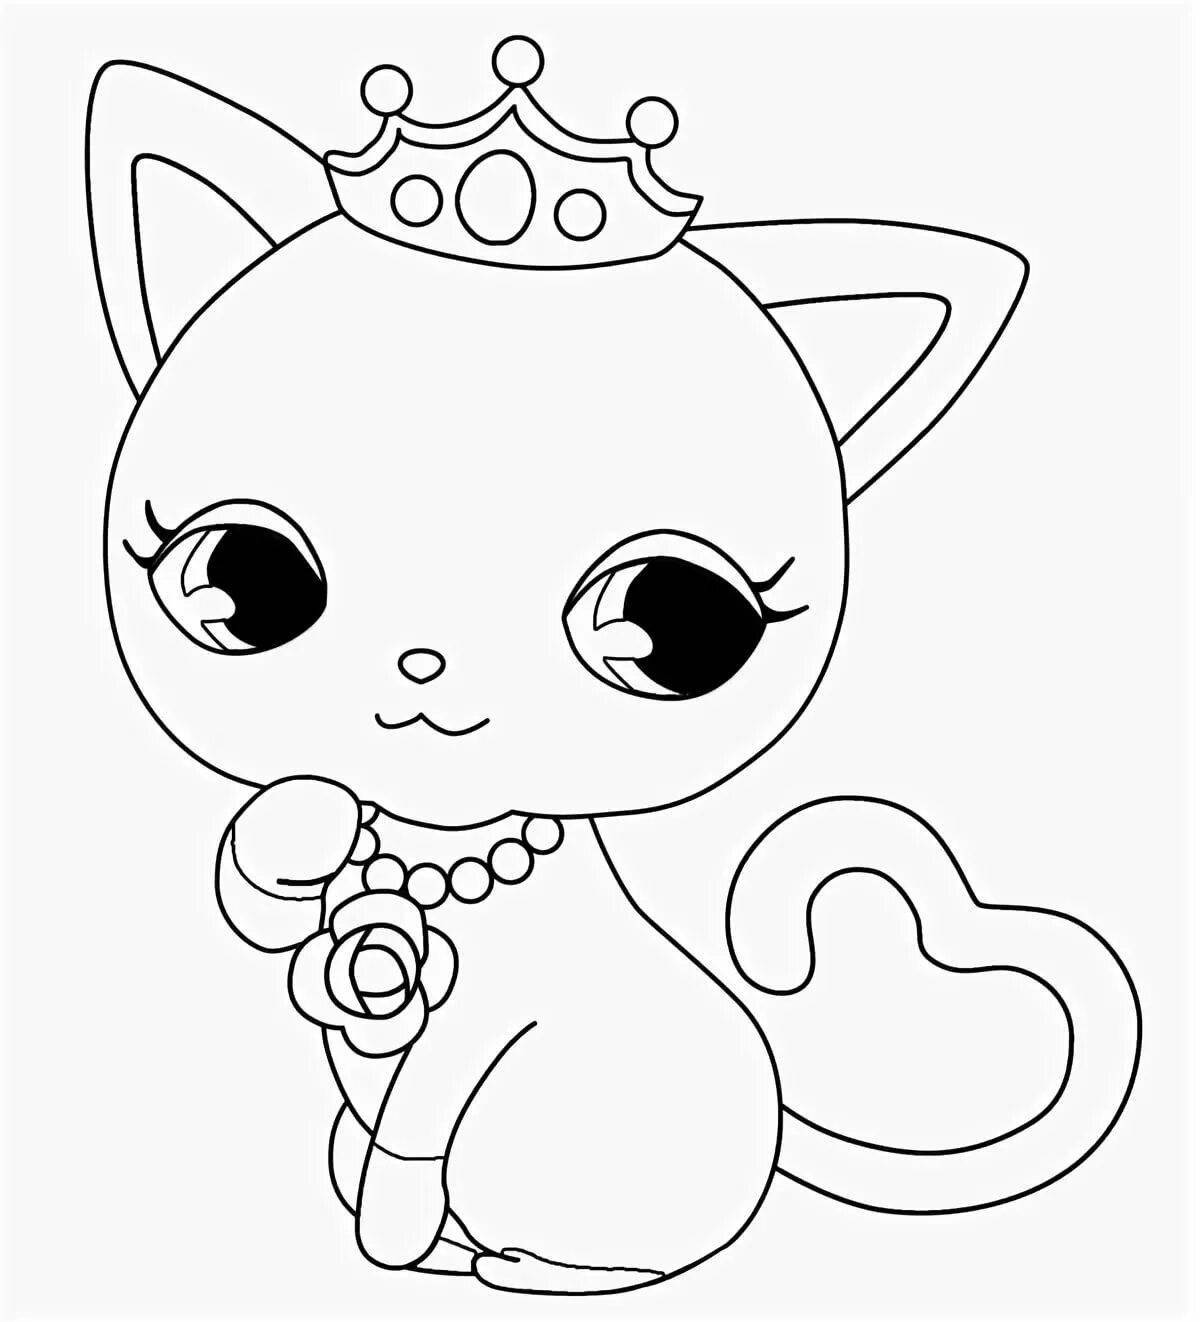 Coloring page naughty little cute kittens